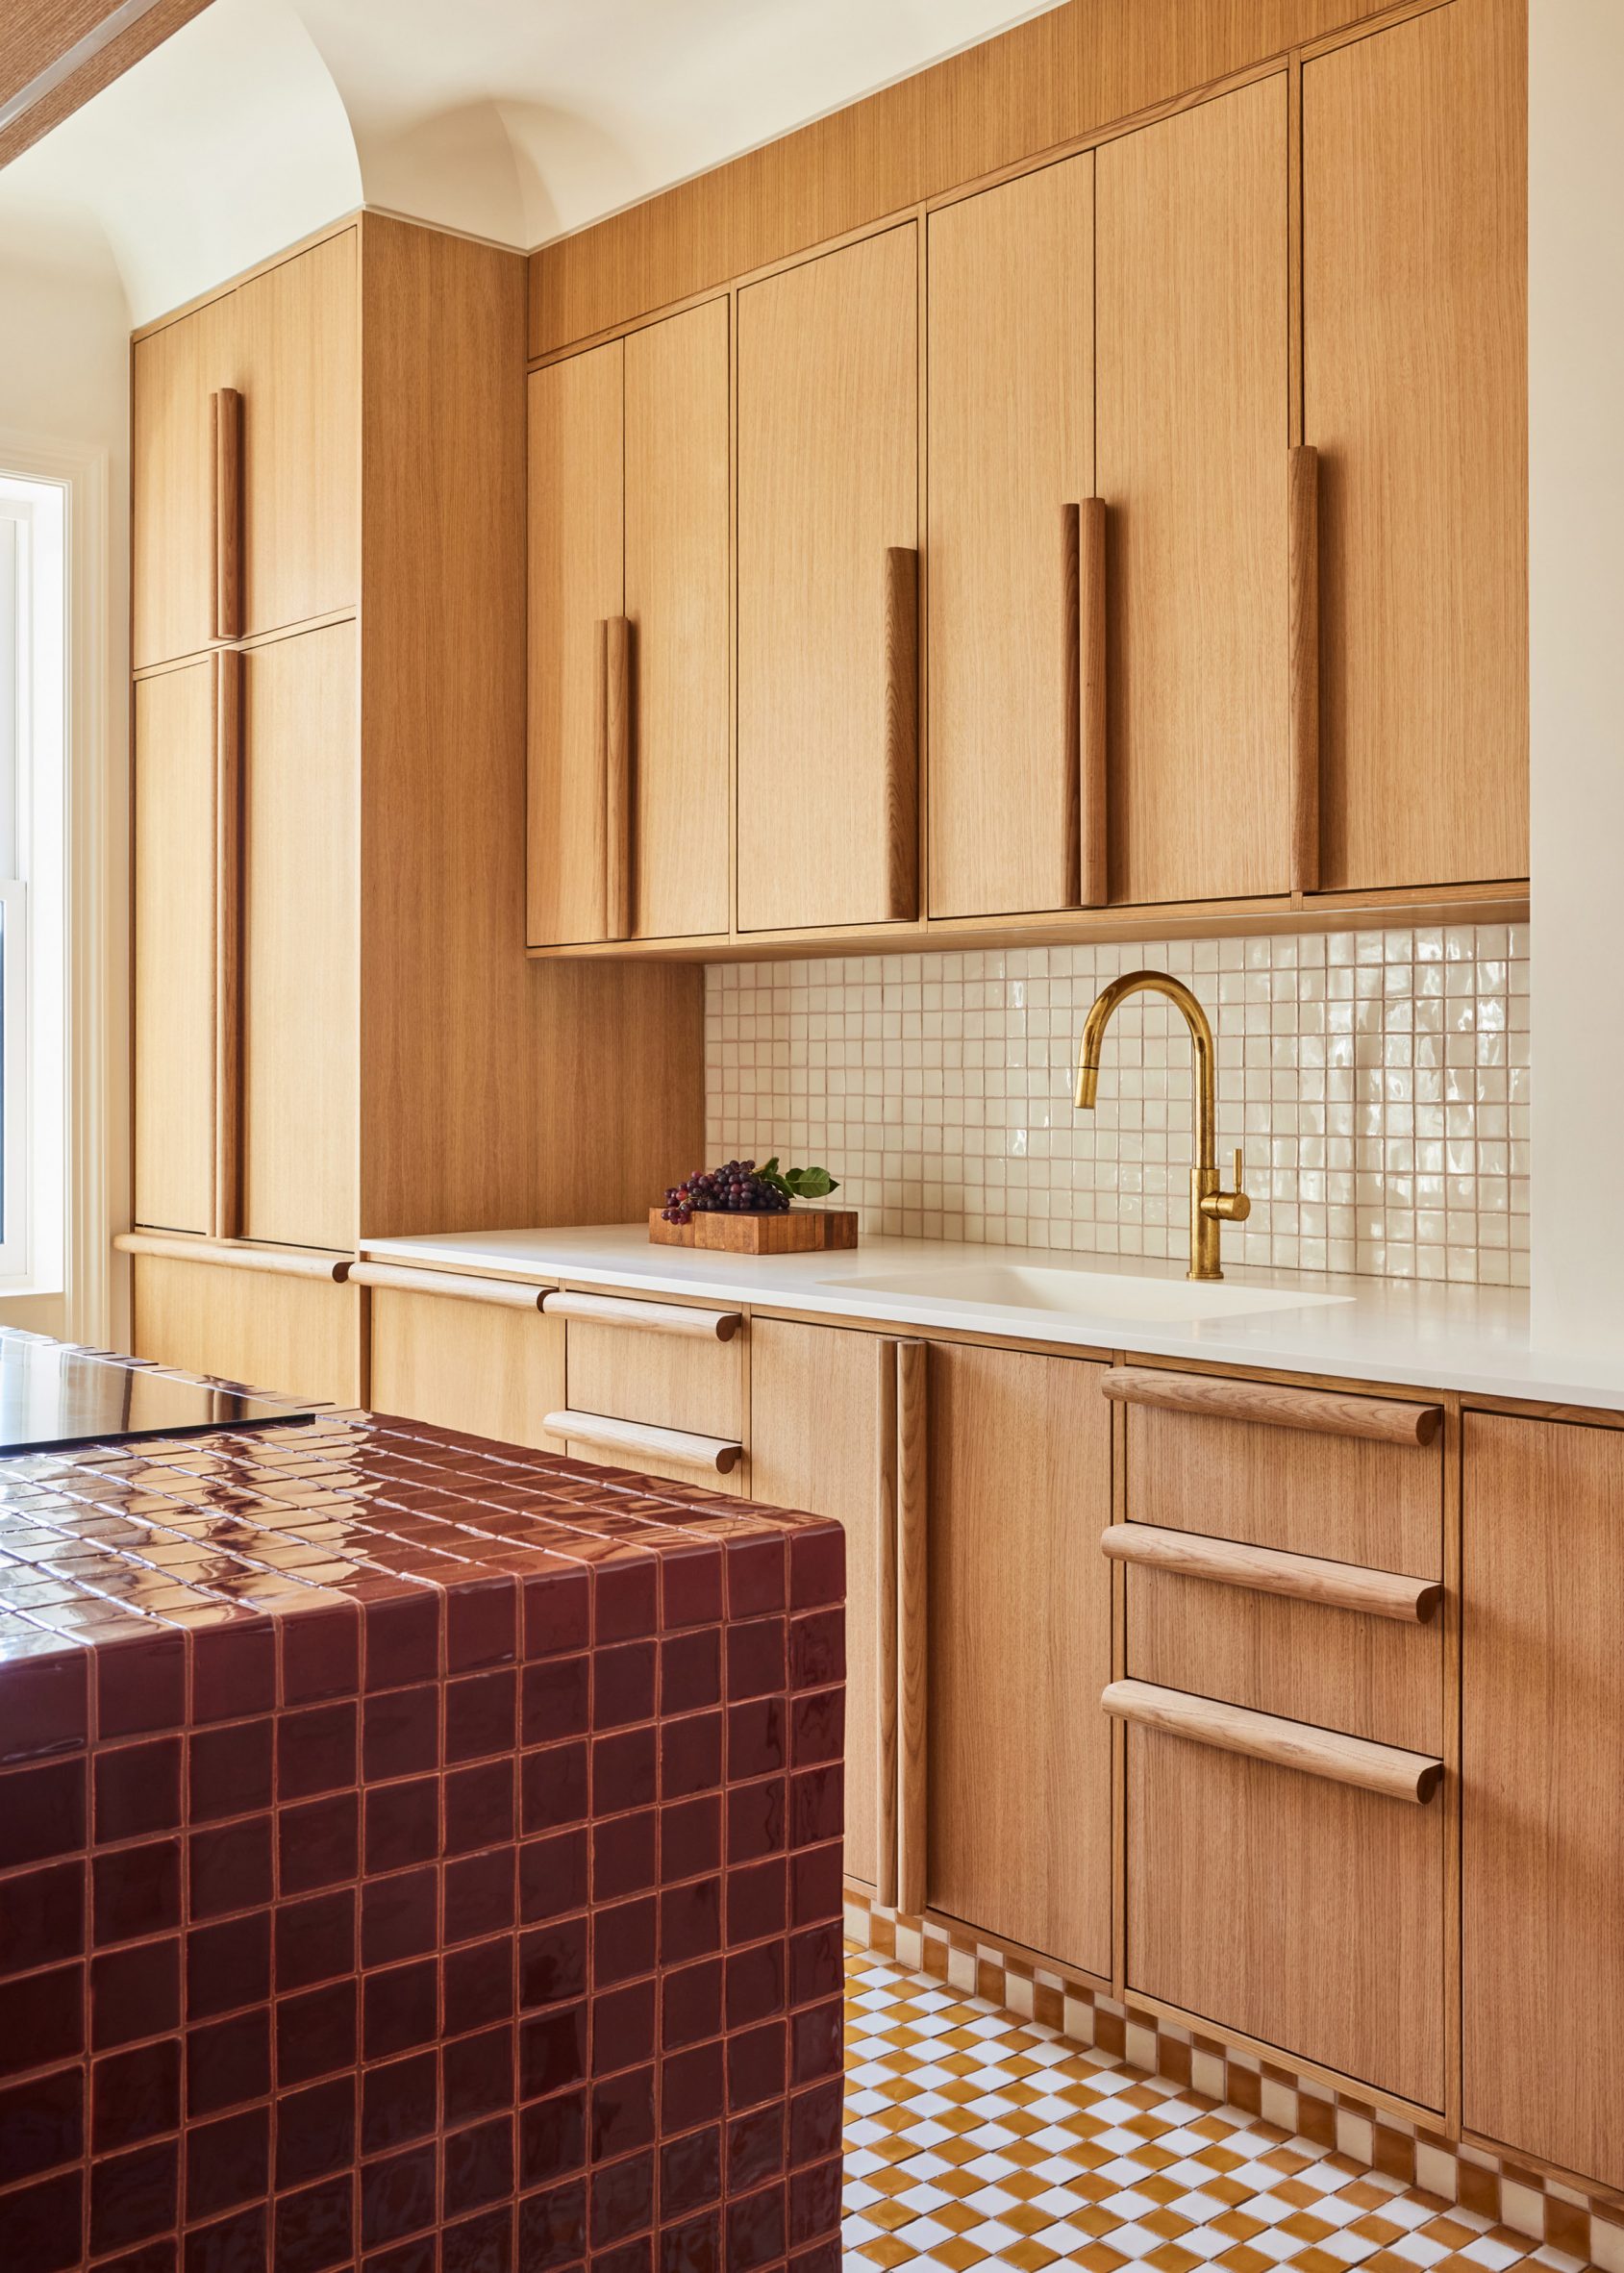 Grt Architects Combines Oak And Mosaic Tiles For East Village Apartment